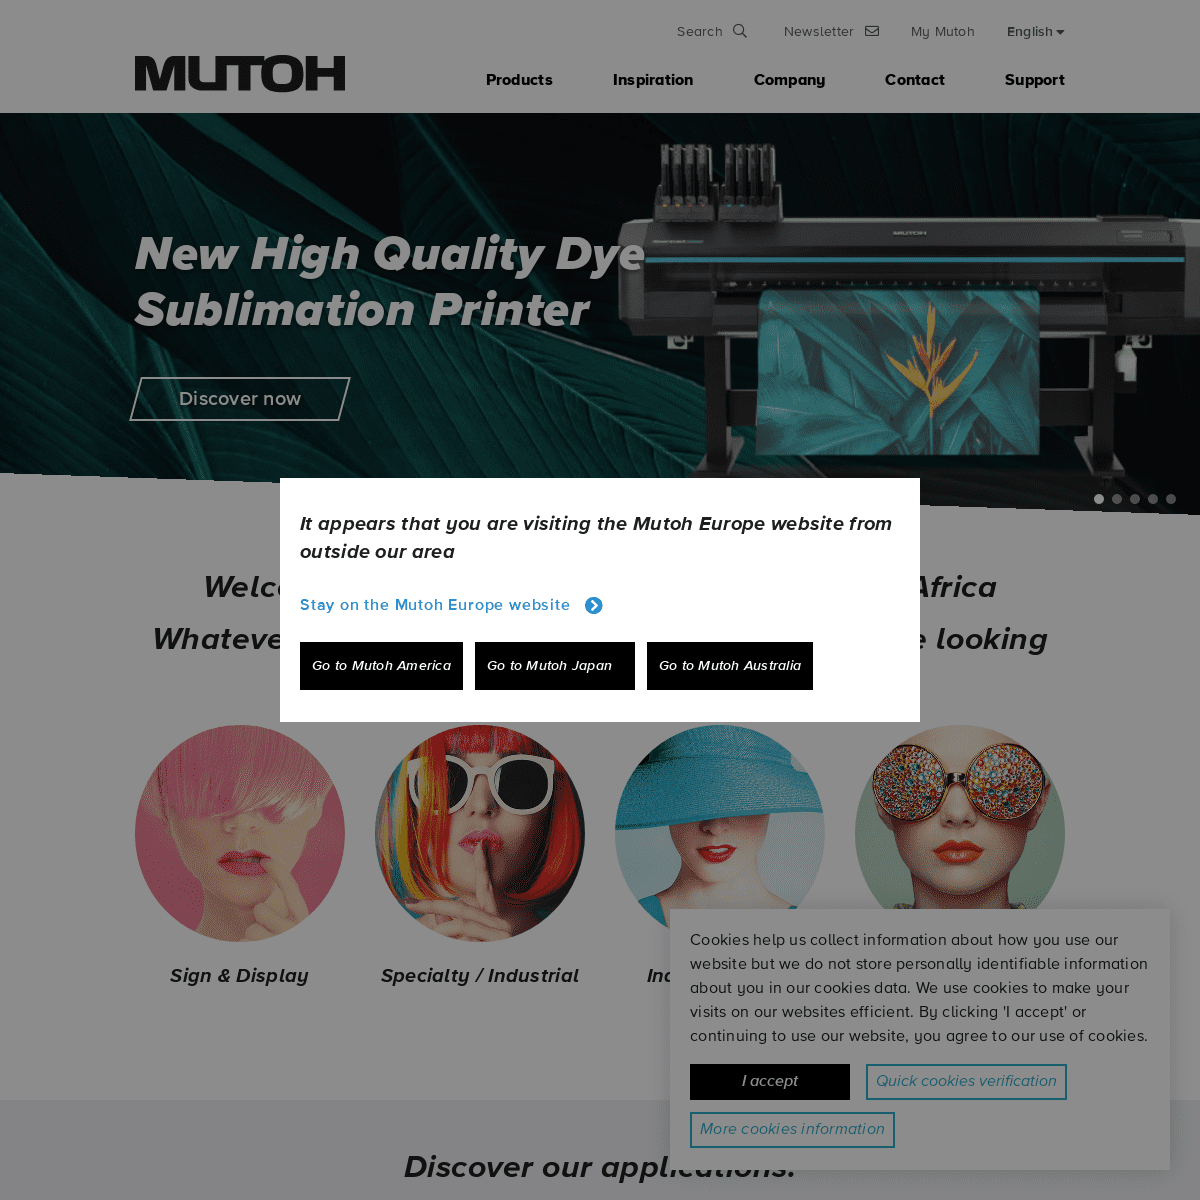 A complete backup of https://mutoh.eu